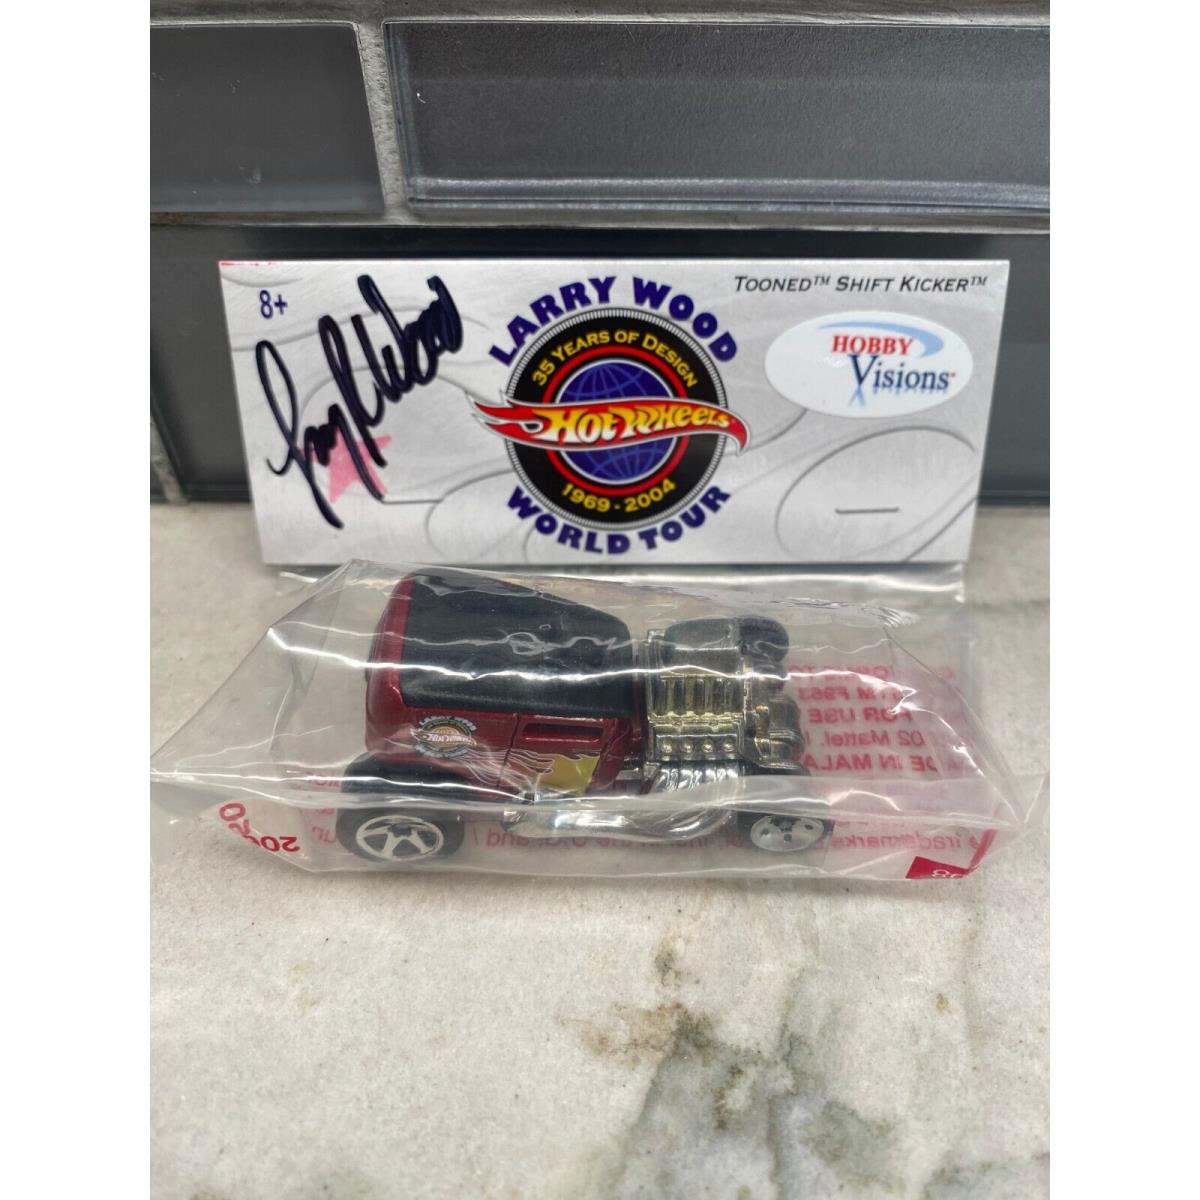 Hot Wheels 2004 Larry Wood World Tour Tooned Shift Kicker Red Signed Baggie